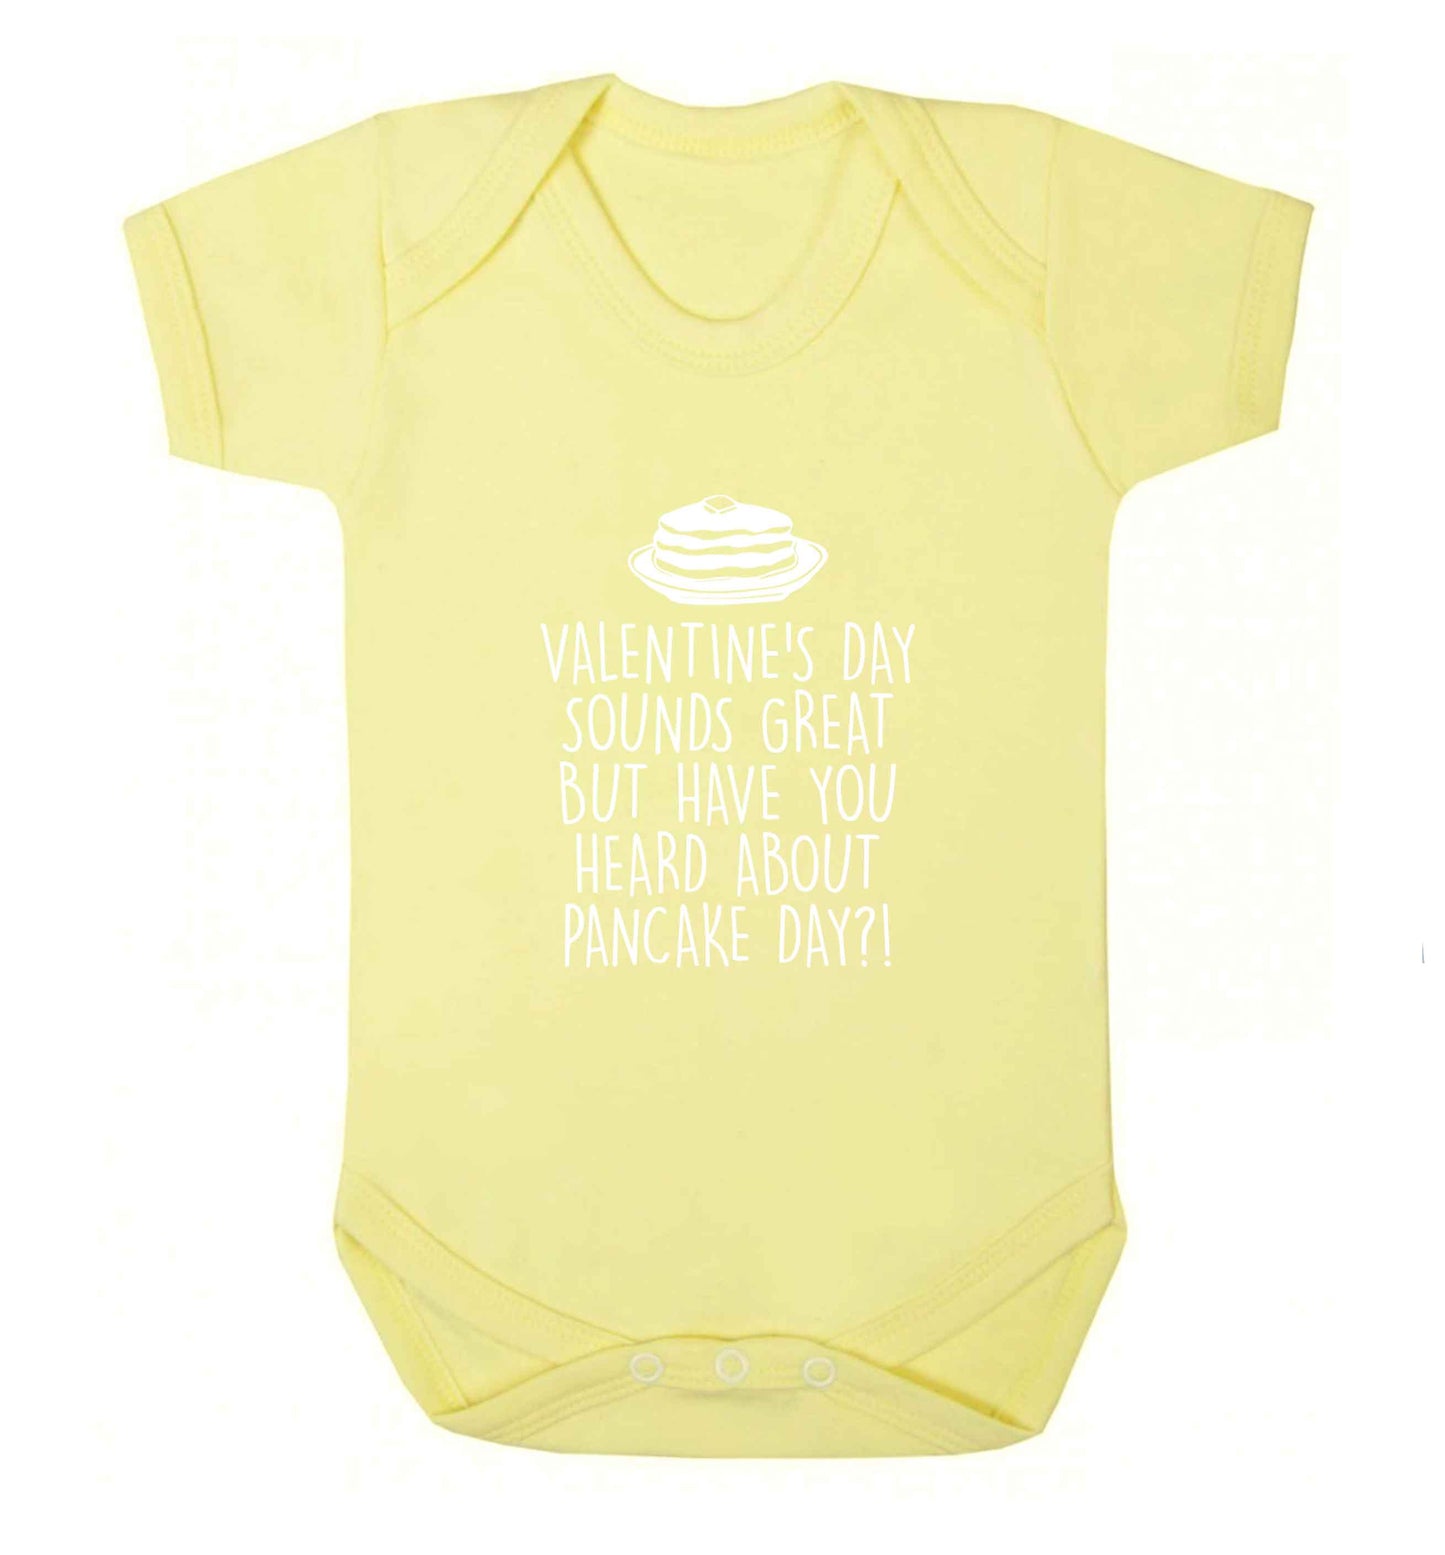 Valentine's day sounds great but have you heard about pancake day?! baby vest pale yellow 18-24 months